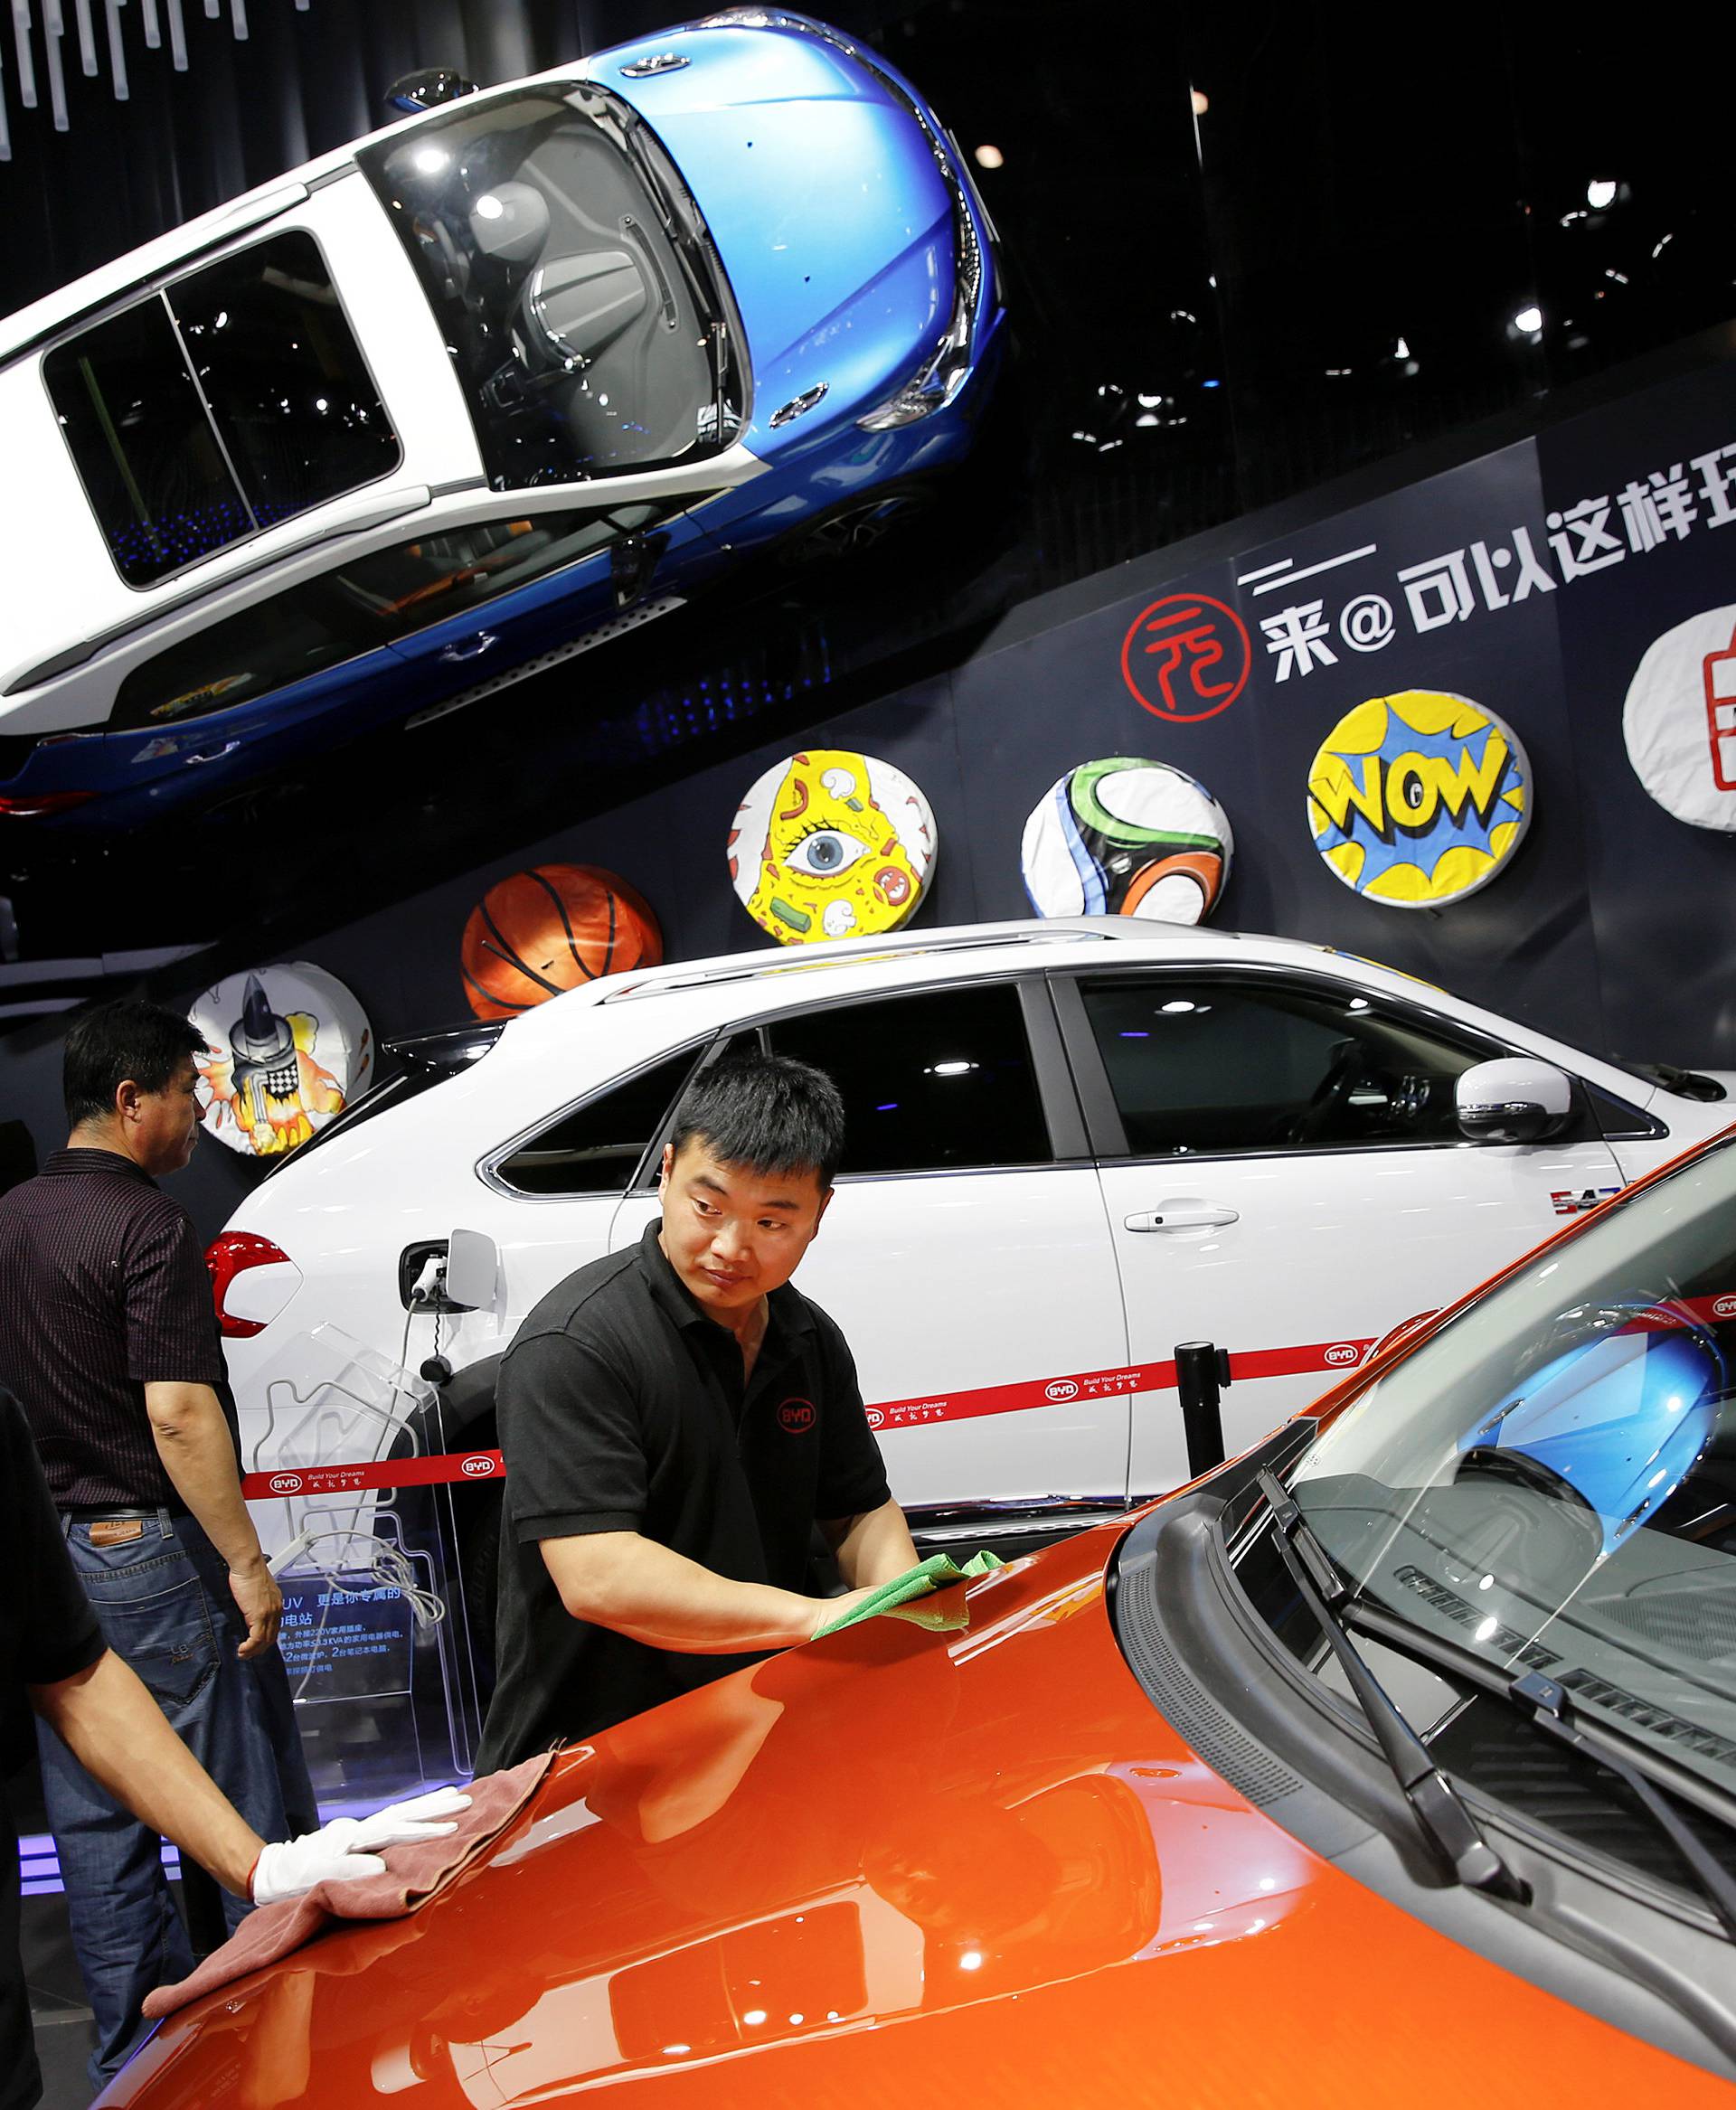 Members of staff clean a vehicle presented at BYD booth during Auto China 2016 auto show in Beijing